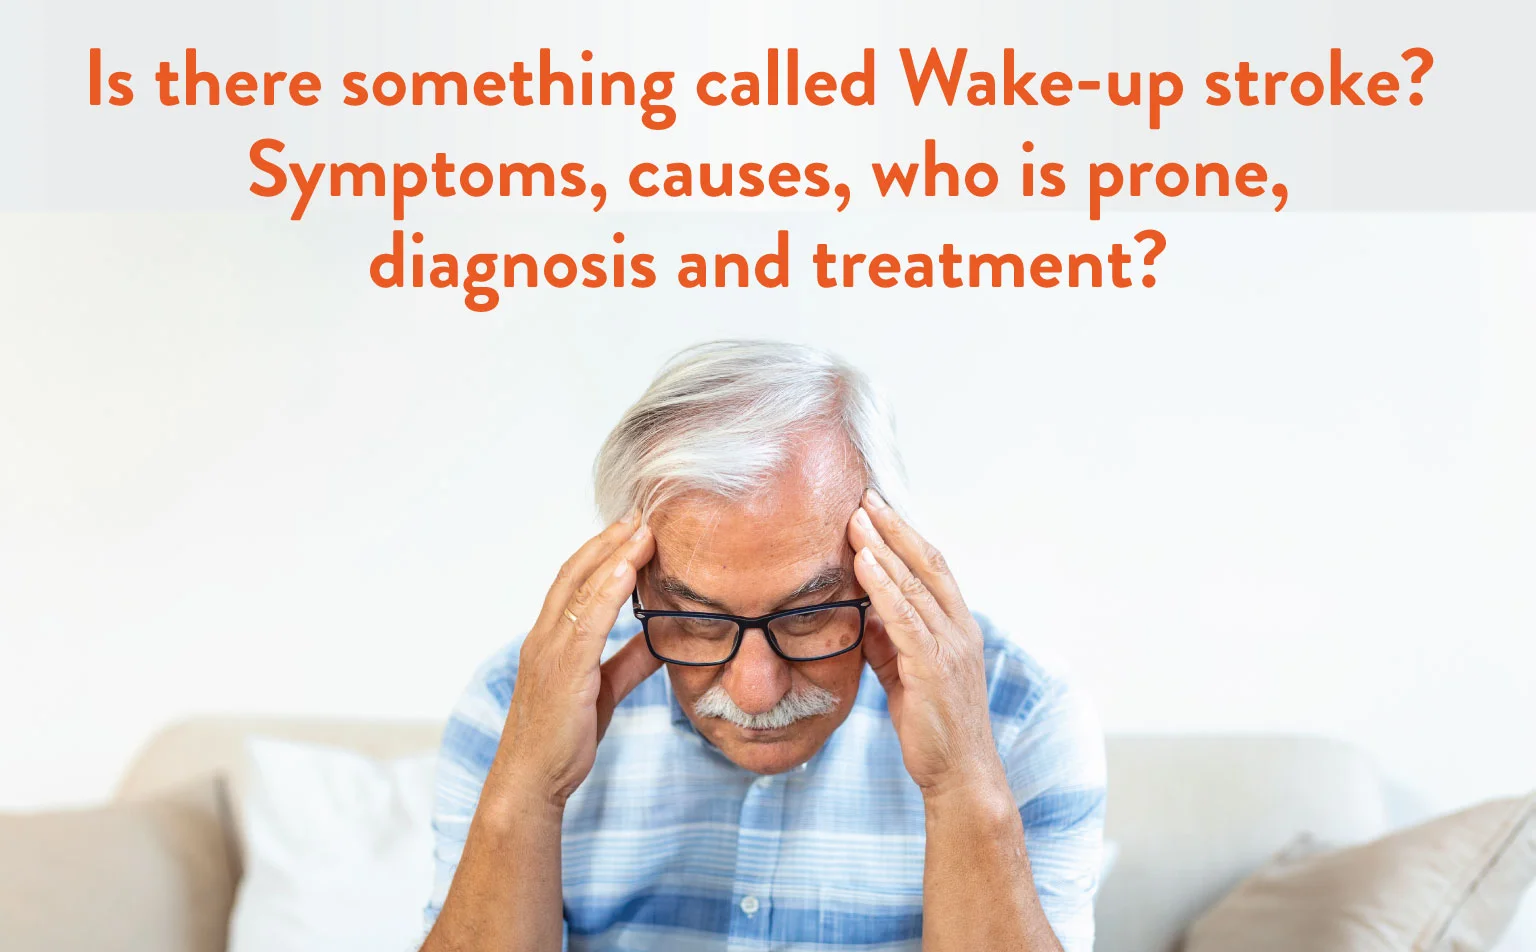 Wake-Up Stroke: Symptoms, Causes, and Treatment